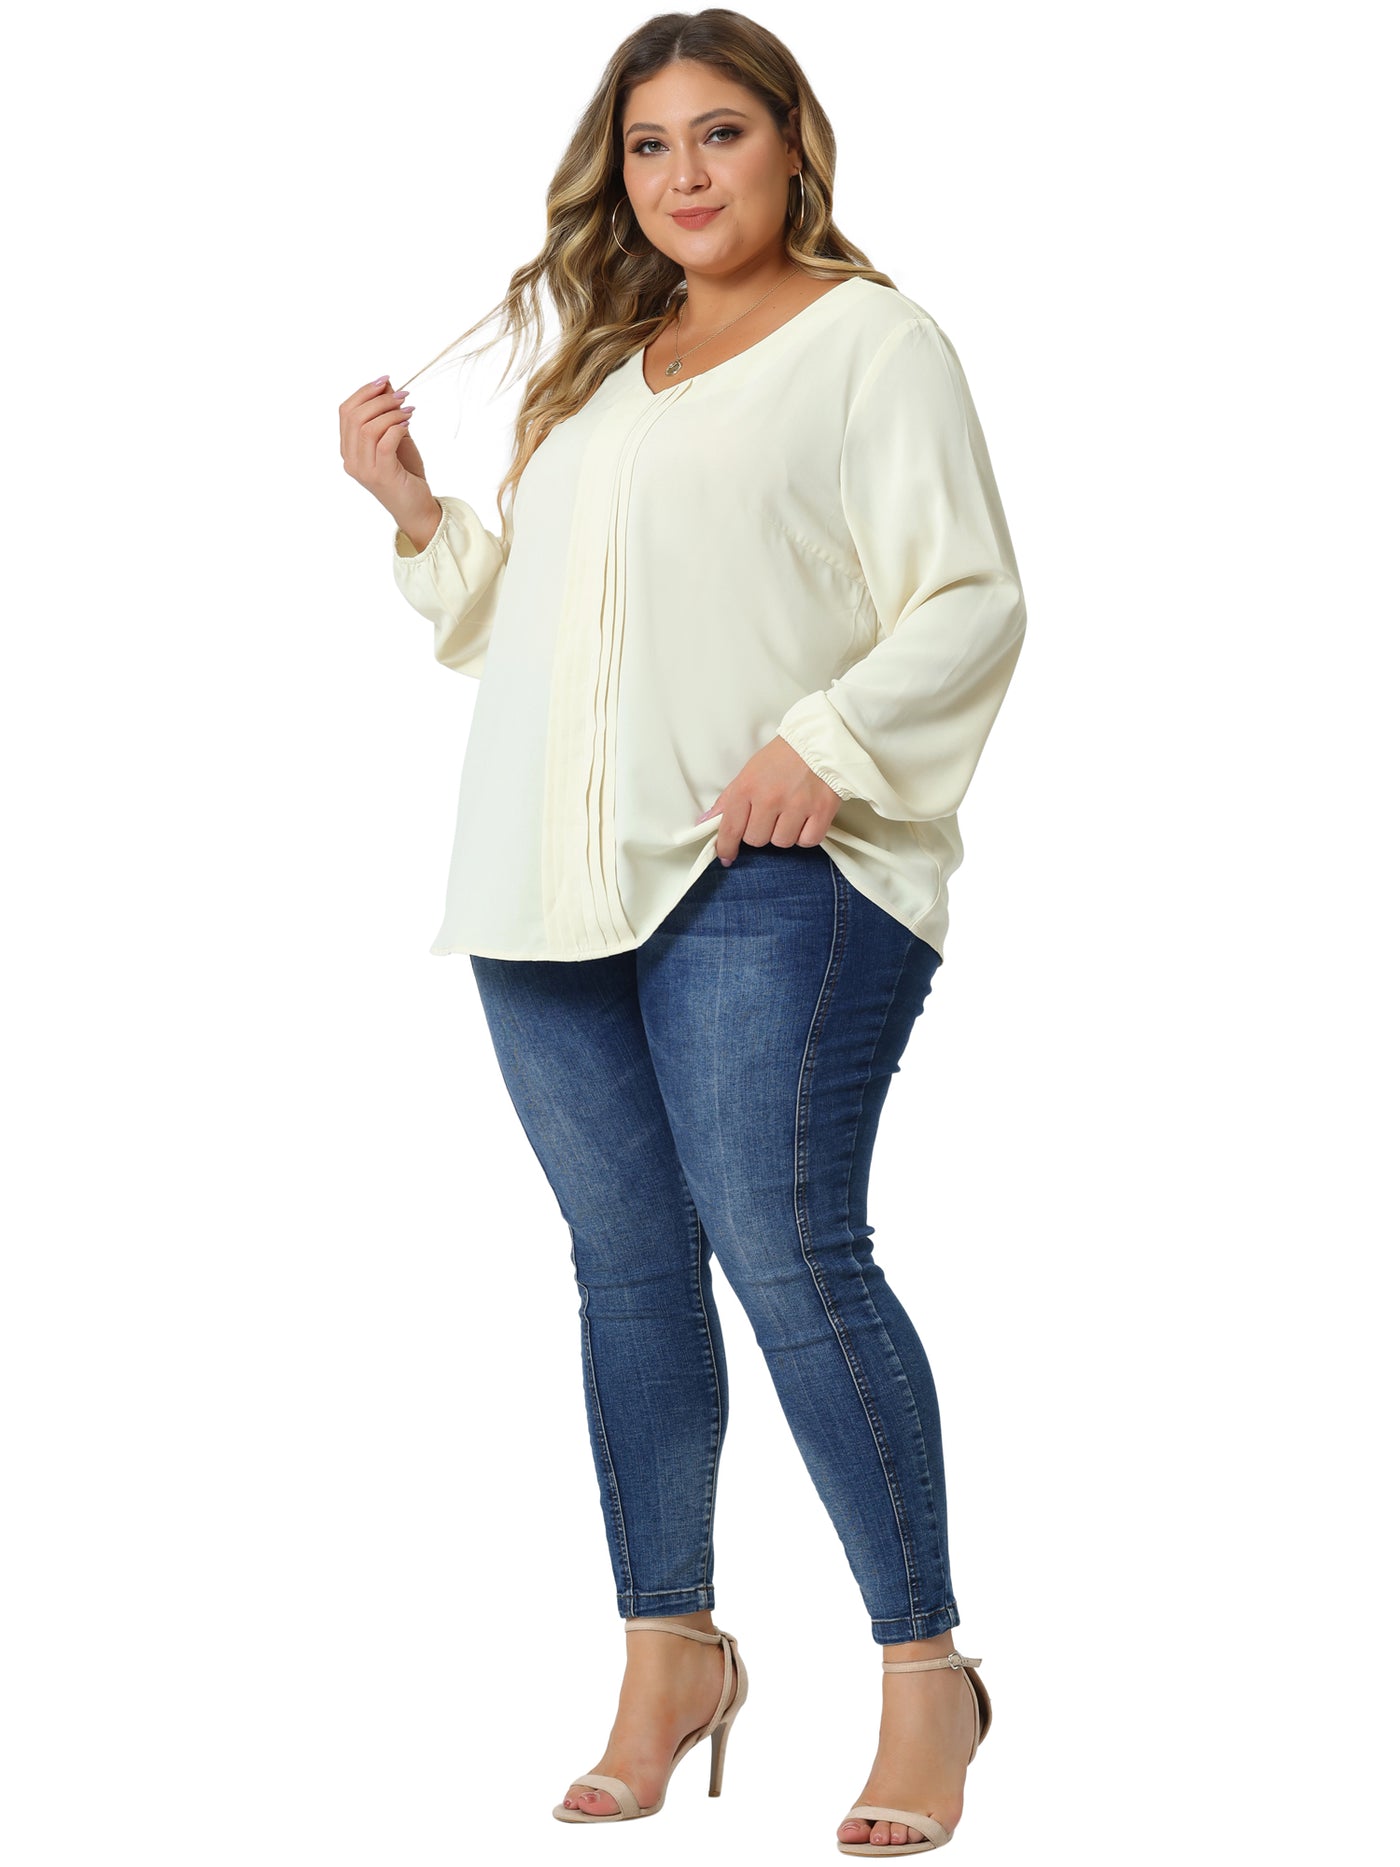 Bublédon Plus Size Blouses for Women Long Sleeve V Neck Casual Chiffon Pleated Front Tops Shirts